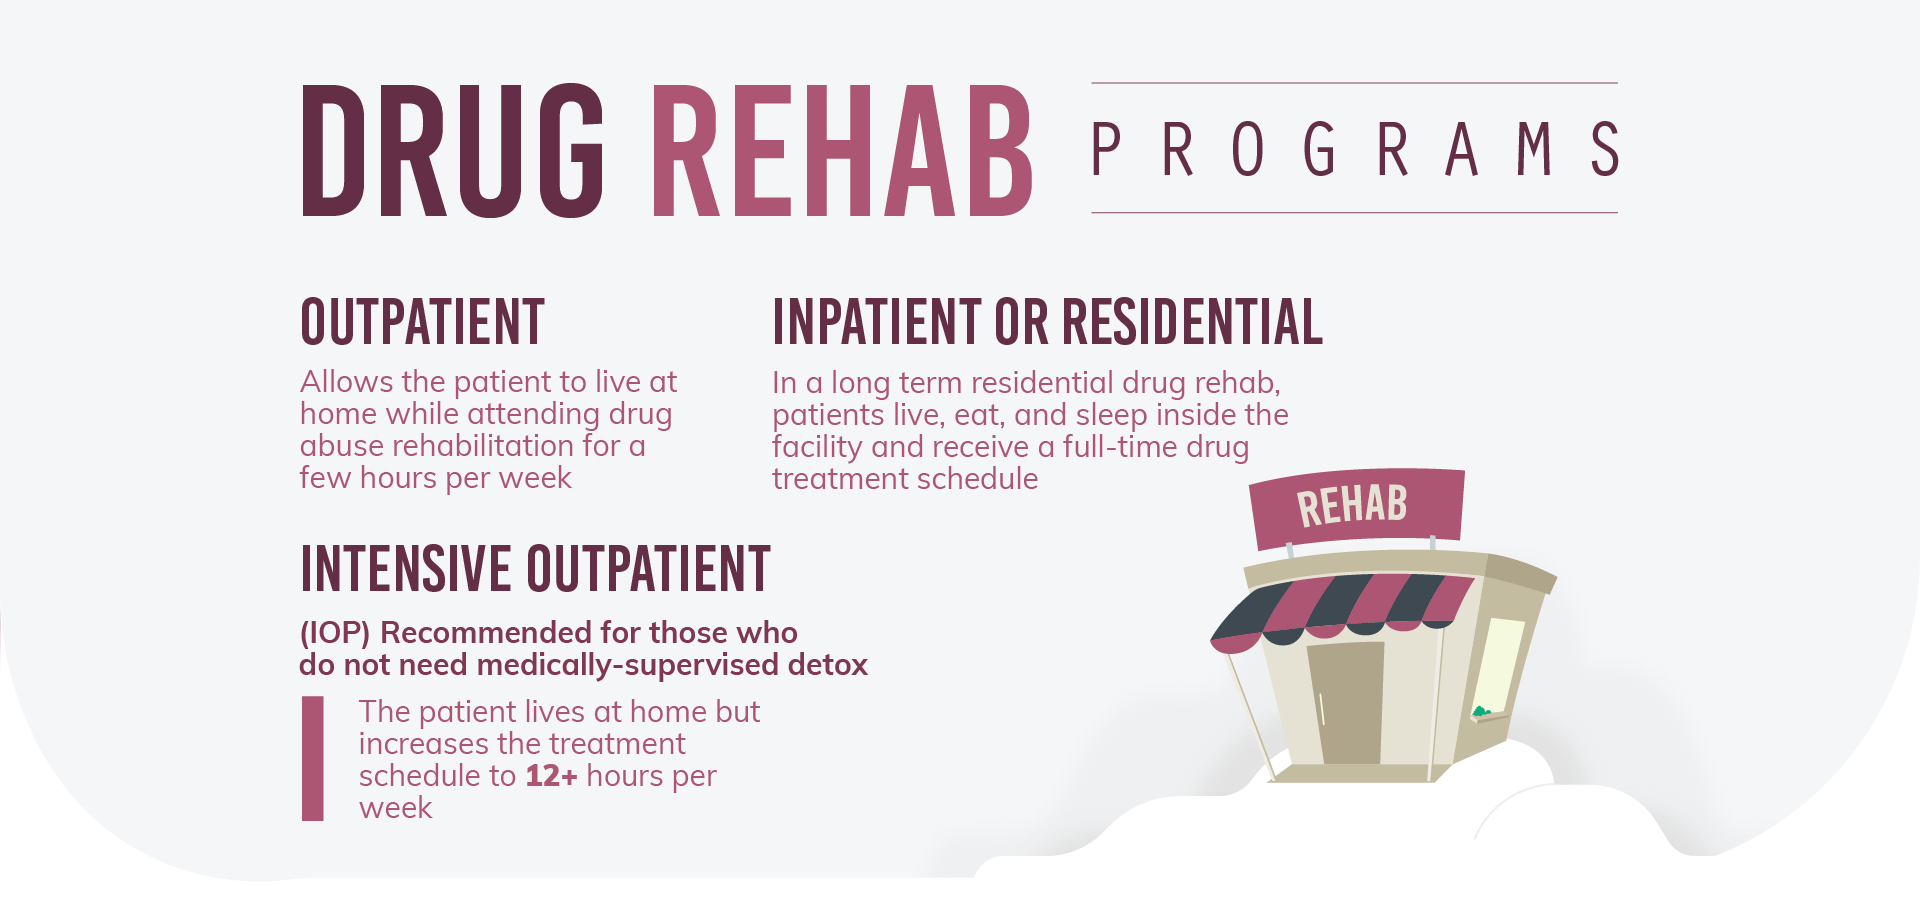 We have many types of drug rehab programs, we have one called "outpatient" which allows the patient to live at home while attending drug abuse rehabilitation for a few hours per week, we also have a program called "inpatient or residential" in which you are in a long term residential drug rehab as a patient, you live,eat and sleep inside the facility and receive a full-time drug treatment schedule, and we have another called "intensive outpatient", this is recommended for those who do not need medically-supervised detox, with this program the patient lives at home but increasesthe treatment schedule with 12 extra hours per week.